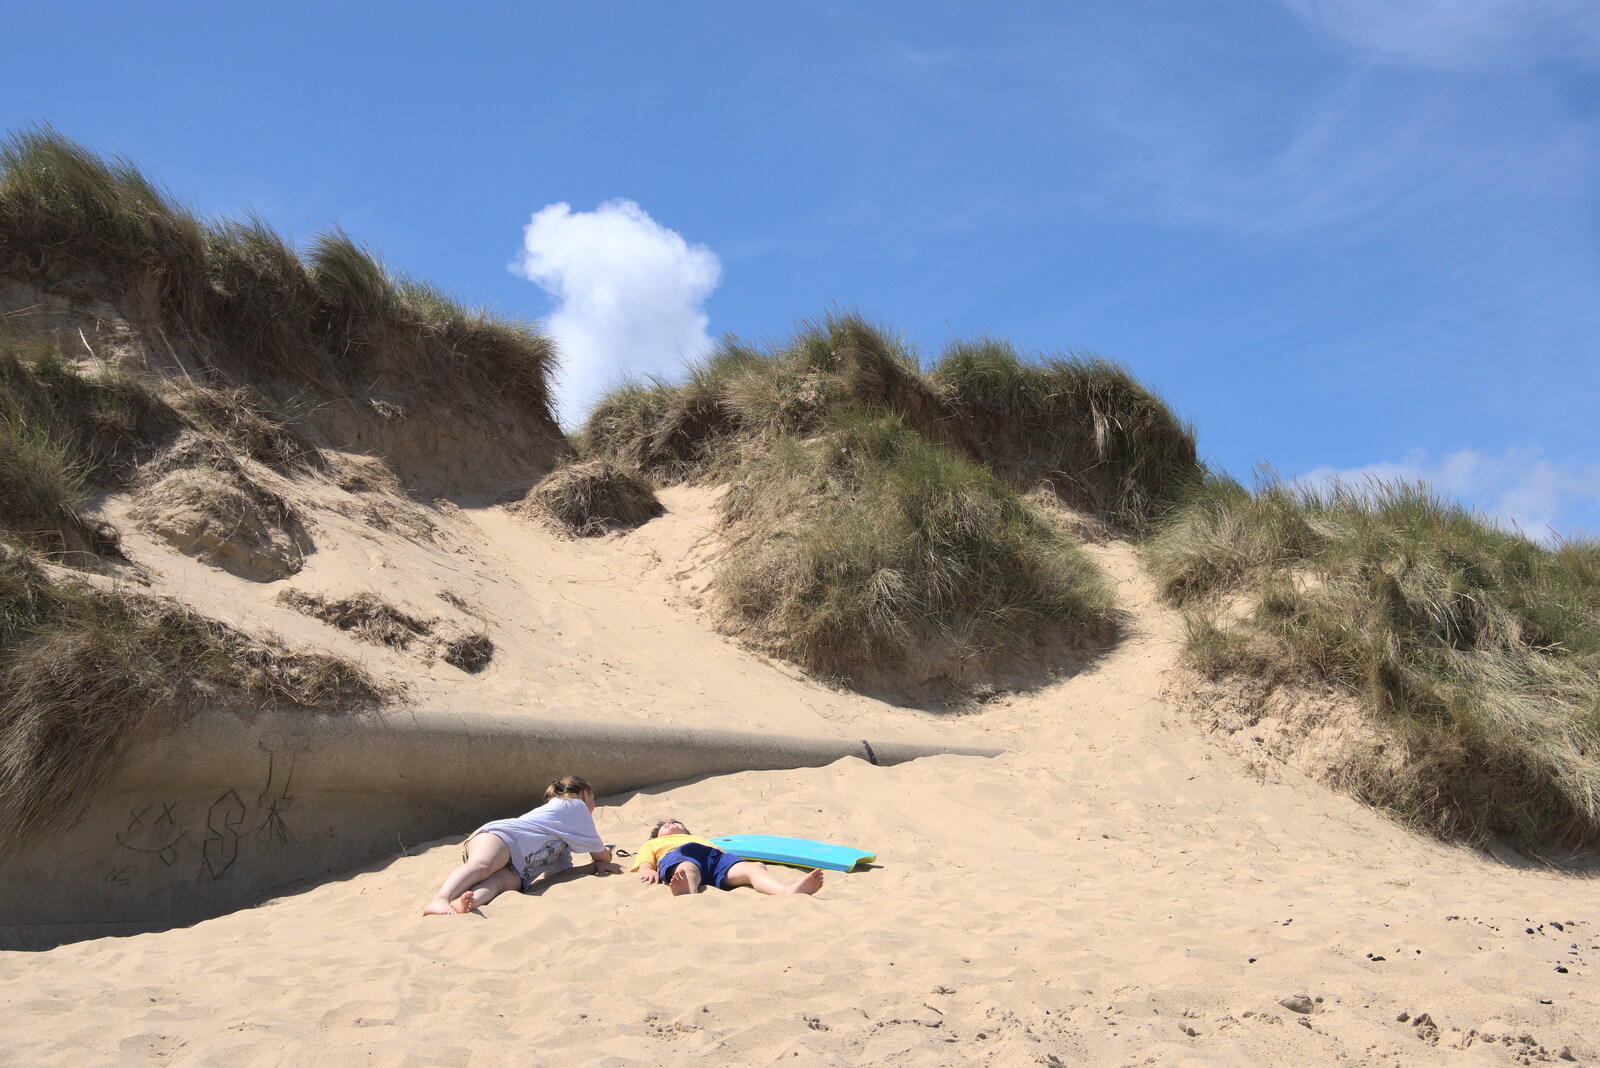 Soph and Fred flake out from Camping in the Dunes, Waxham Sands, Norfolk - 9th July 2022